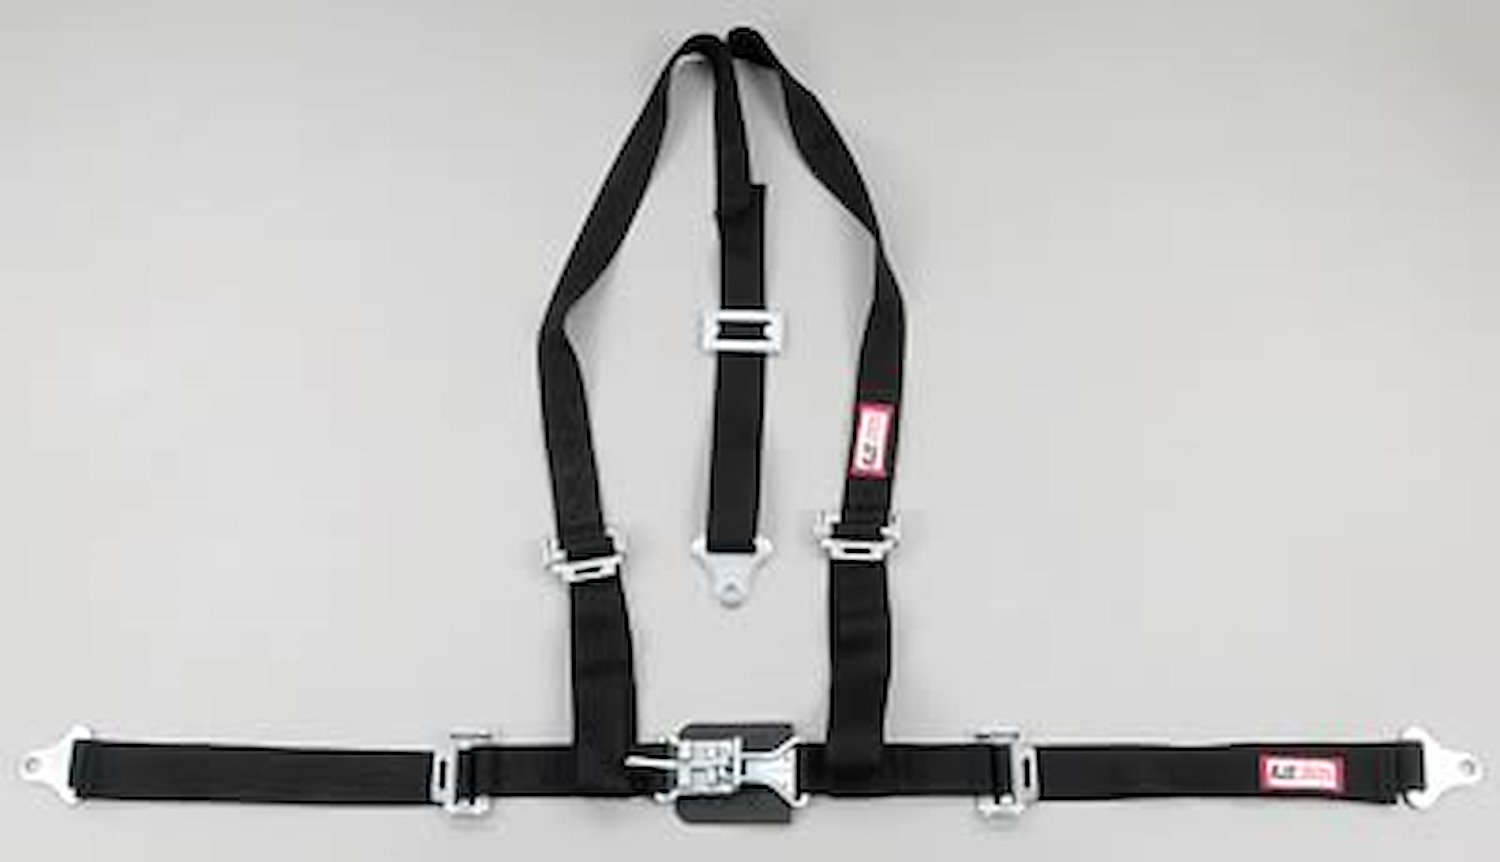 NON-SFI L&L HARNESS 3 PULL DOWN Lap Belt w/adjuster 2 S.H. Individual ROLL BAR Mount ALL WRAP ENDS RED